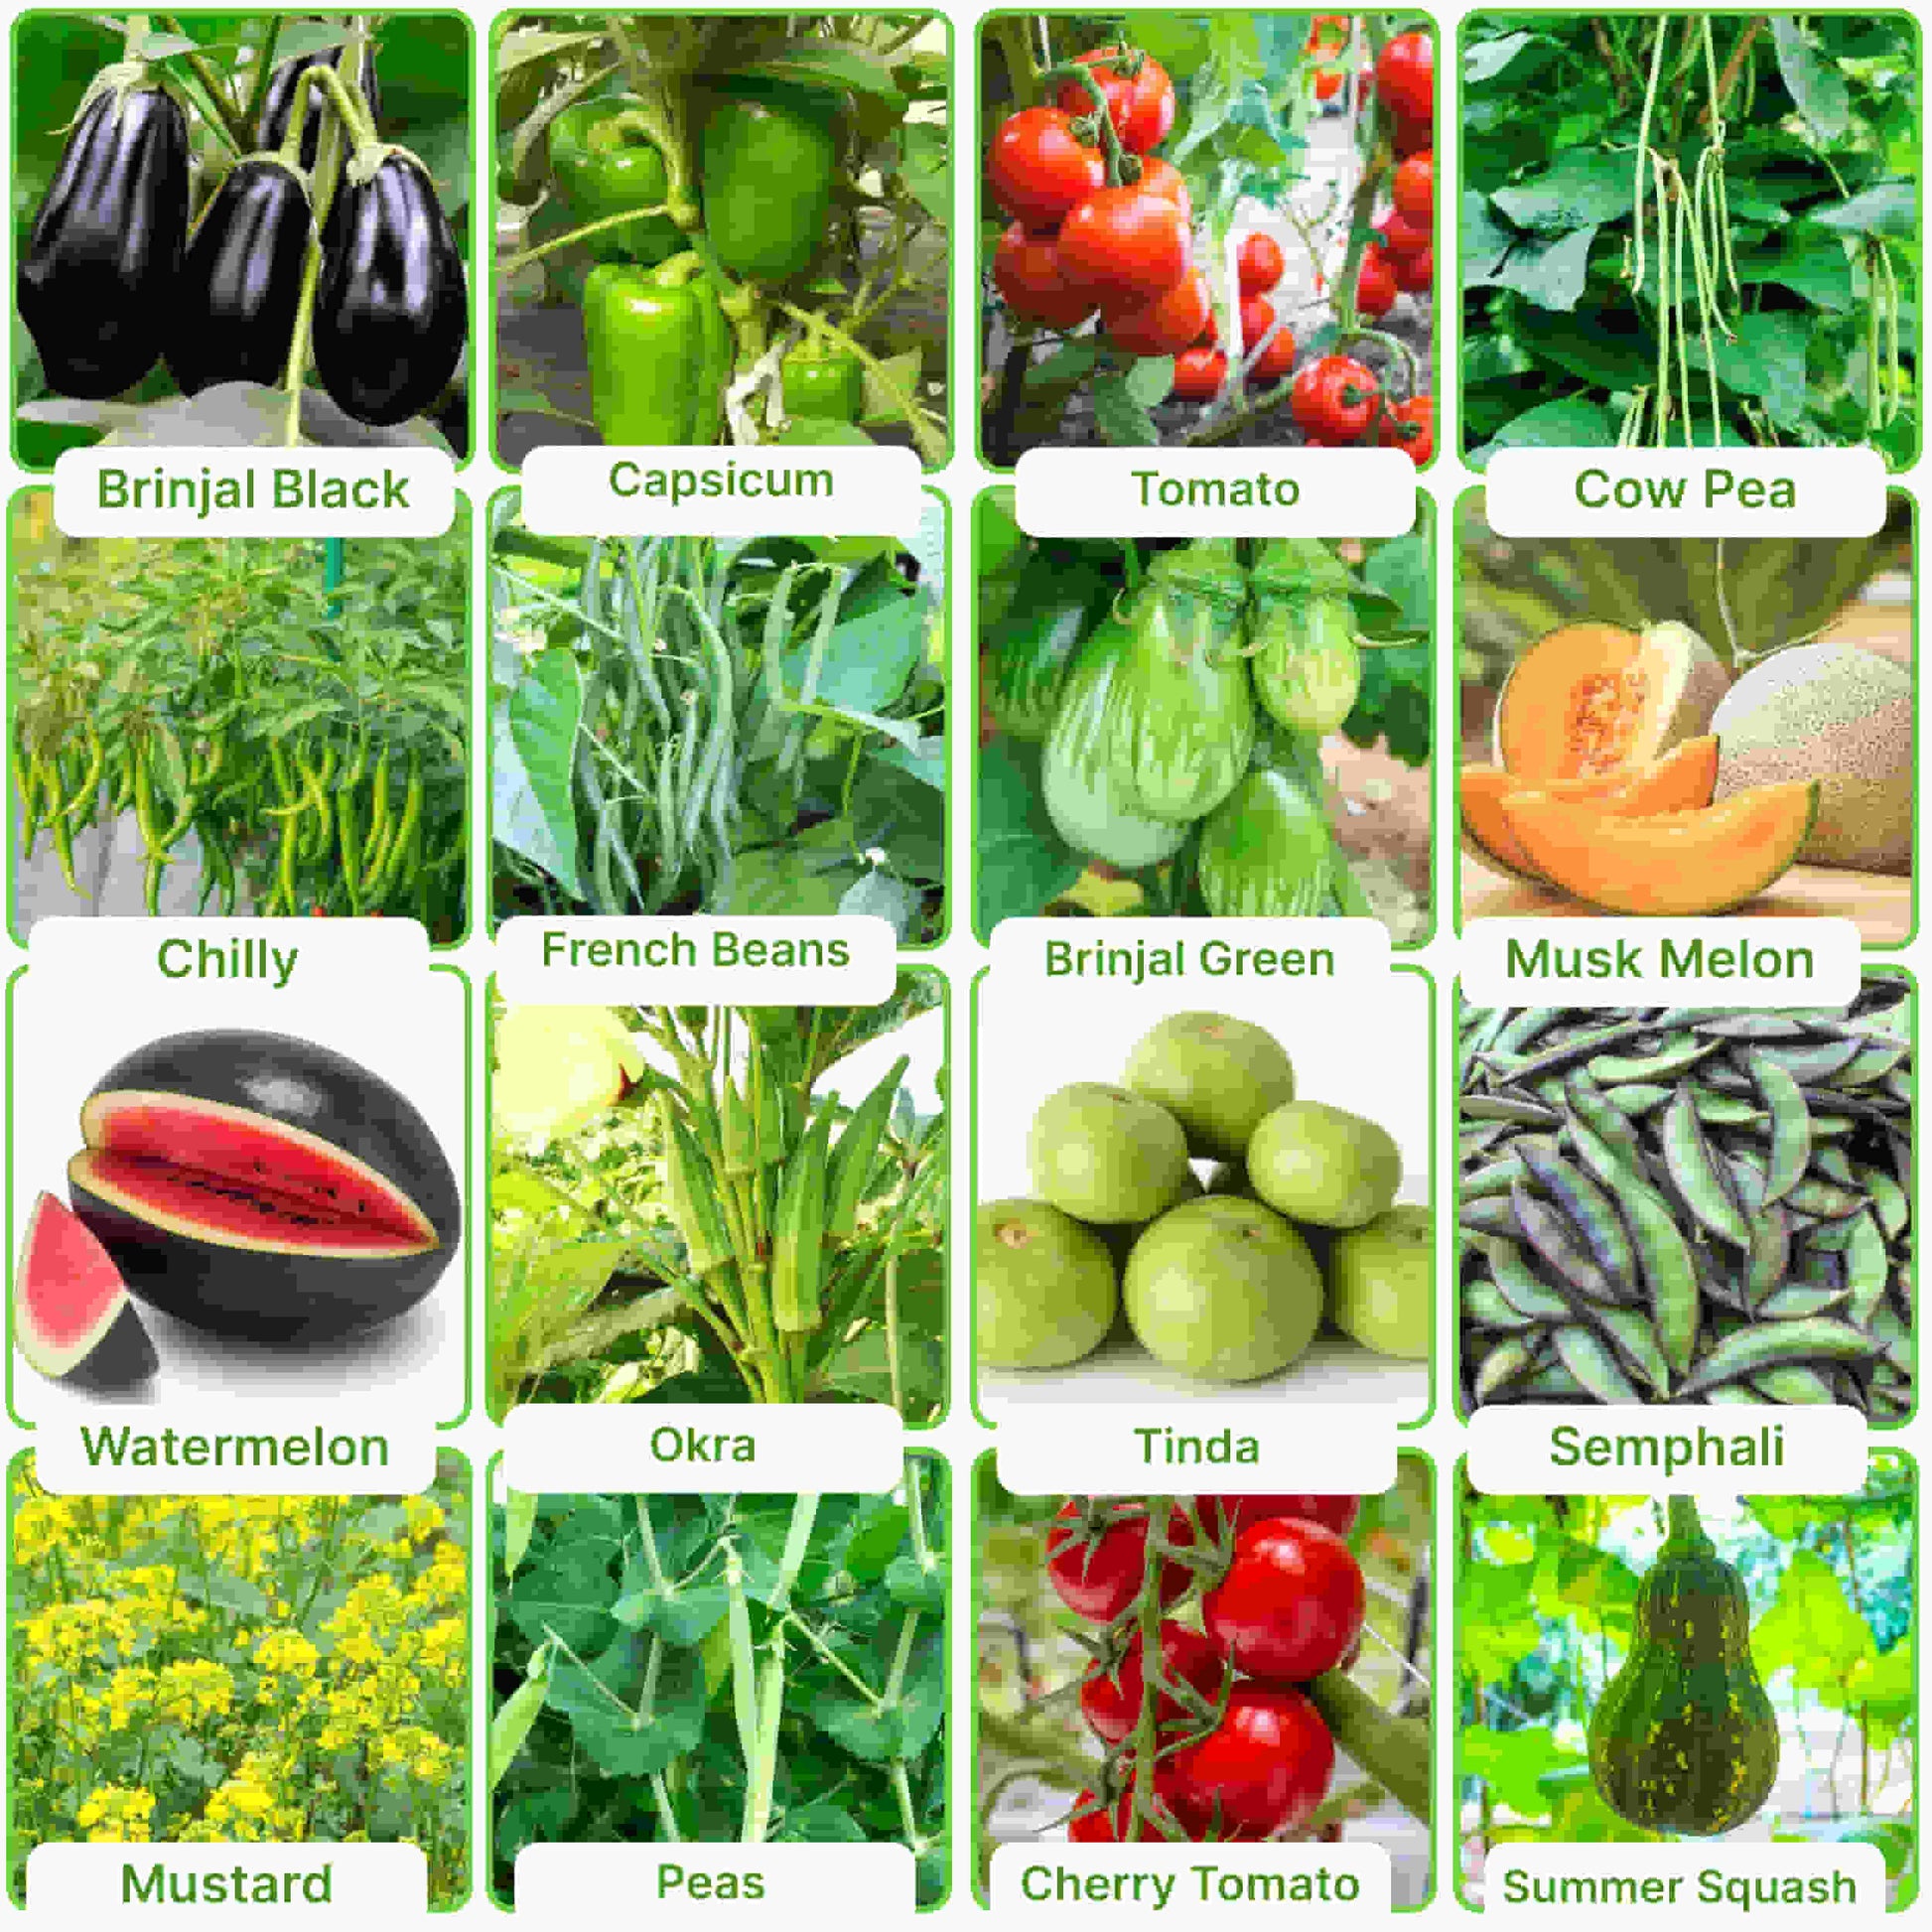 Remaining Vegetables with names